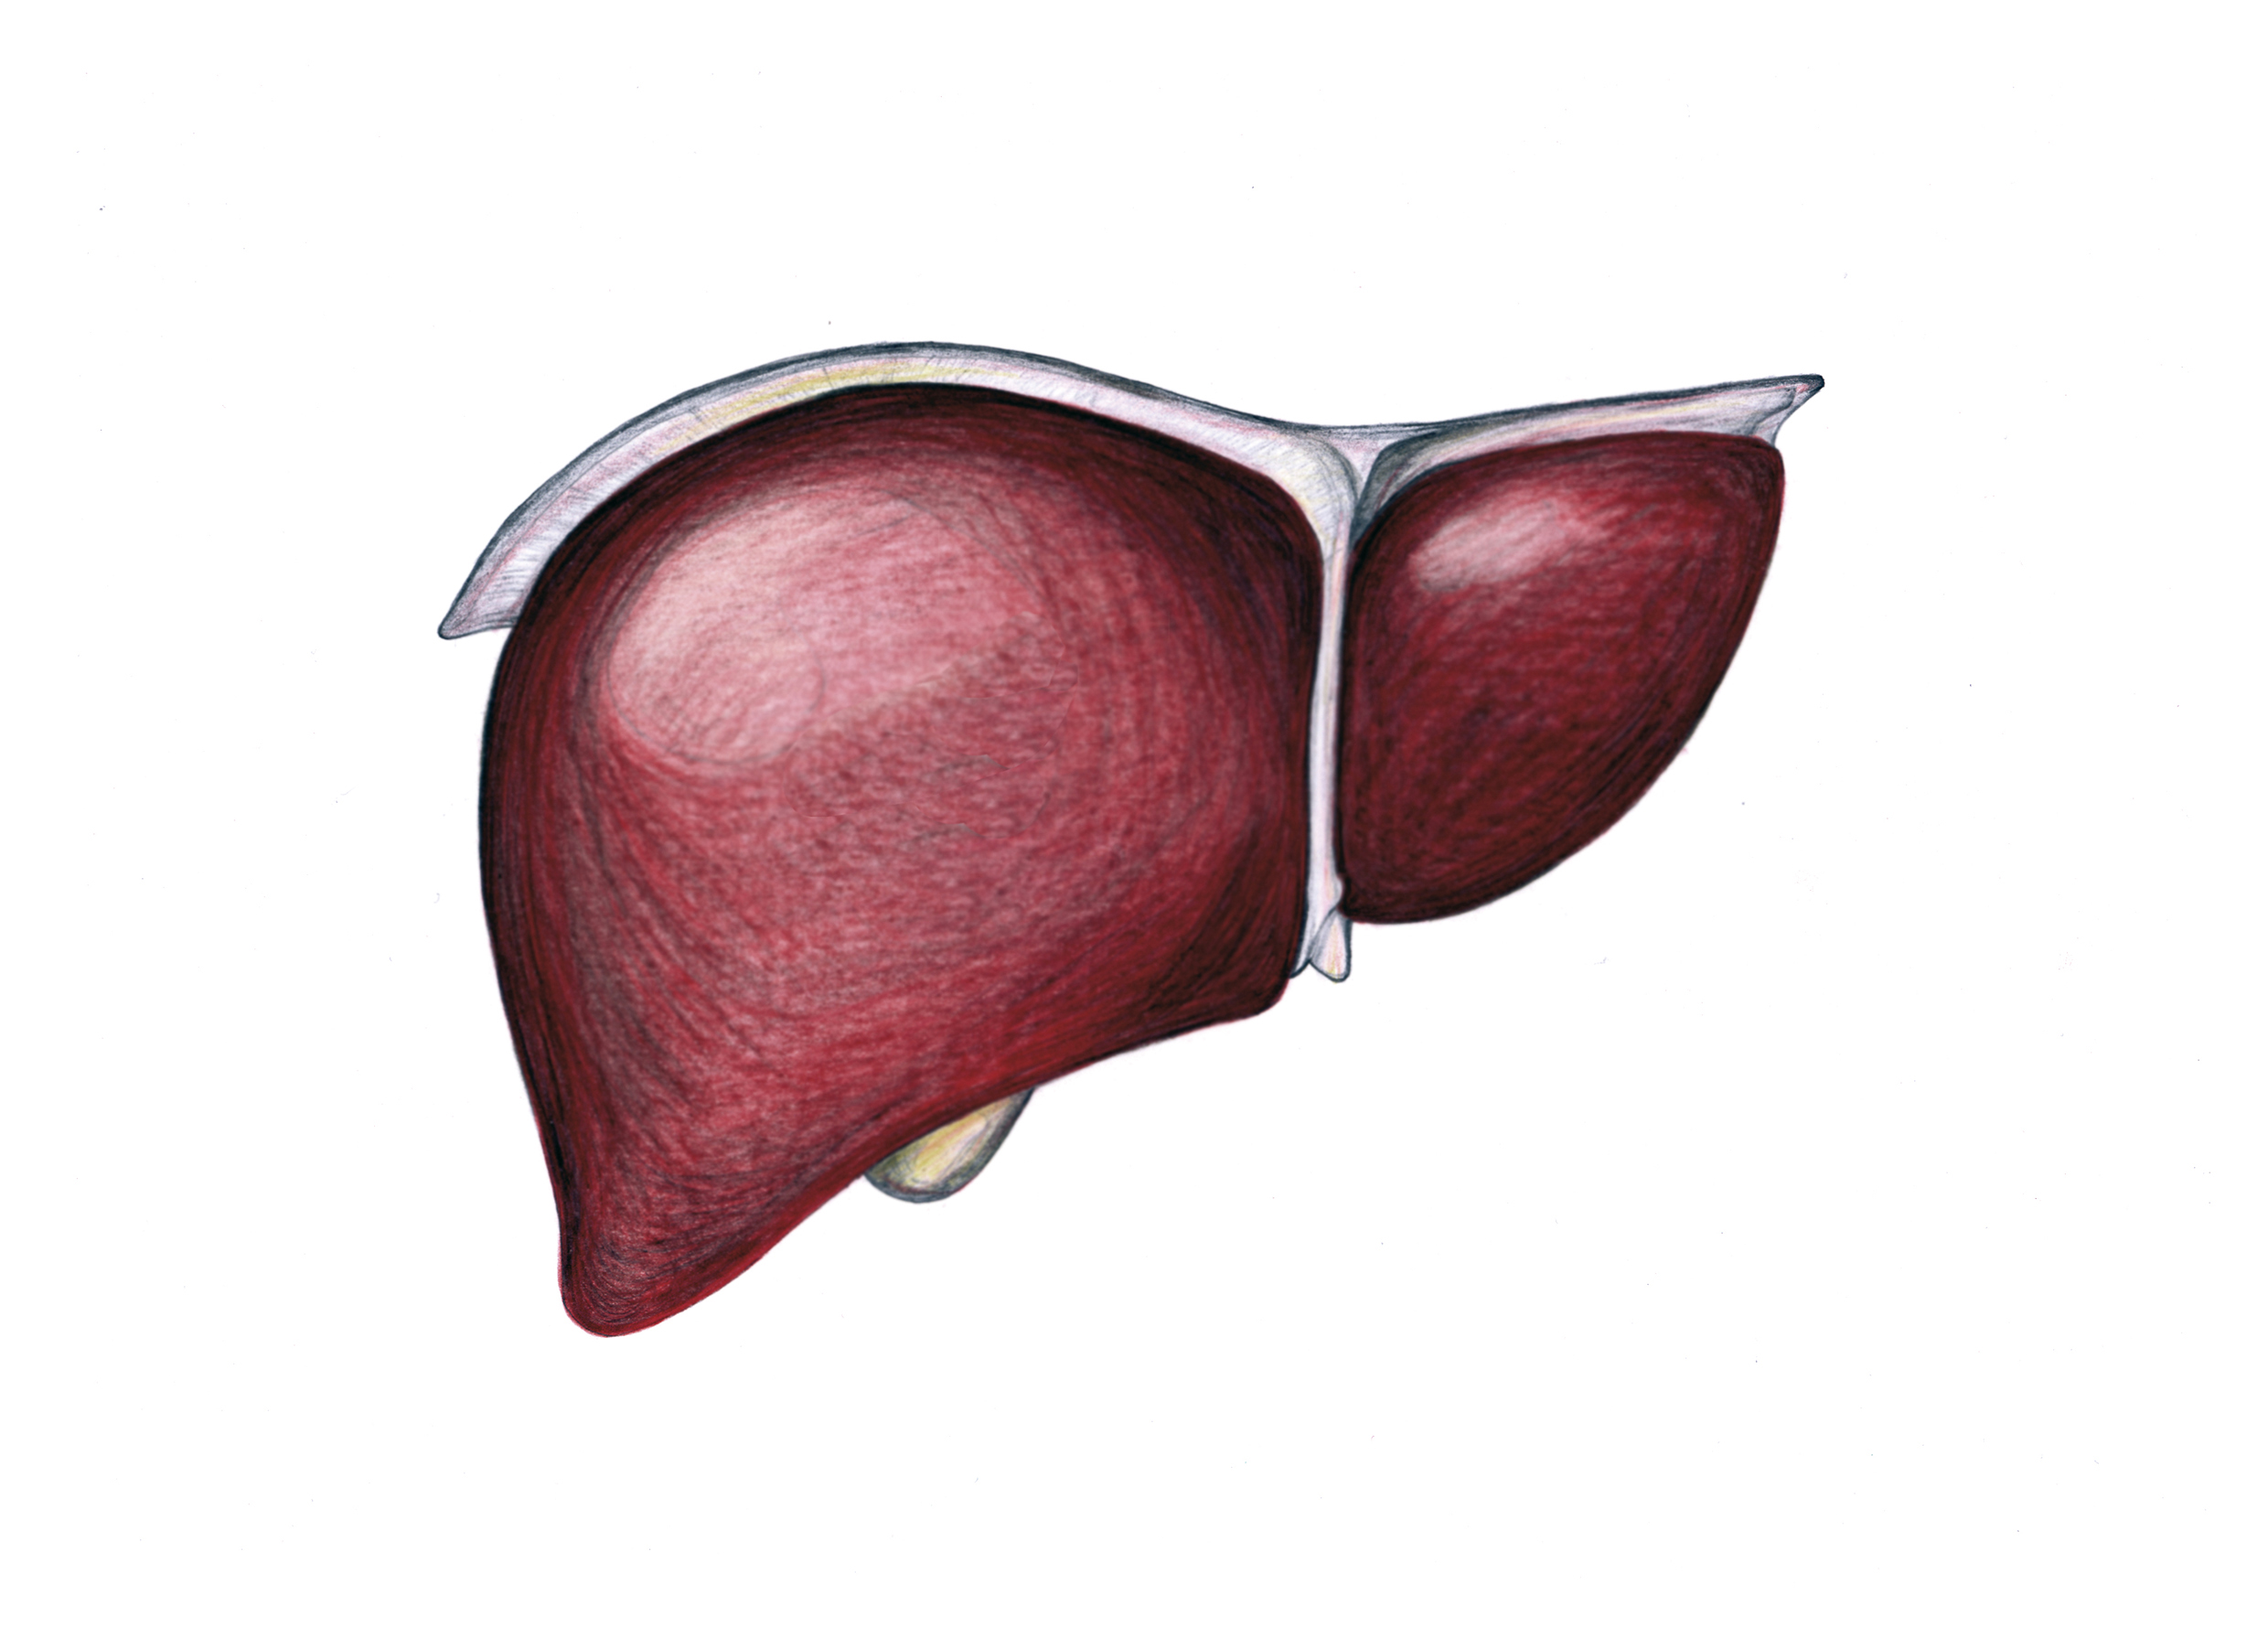 Drawing of a human liver